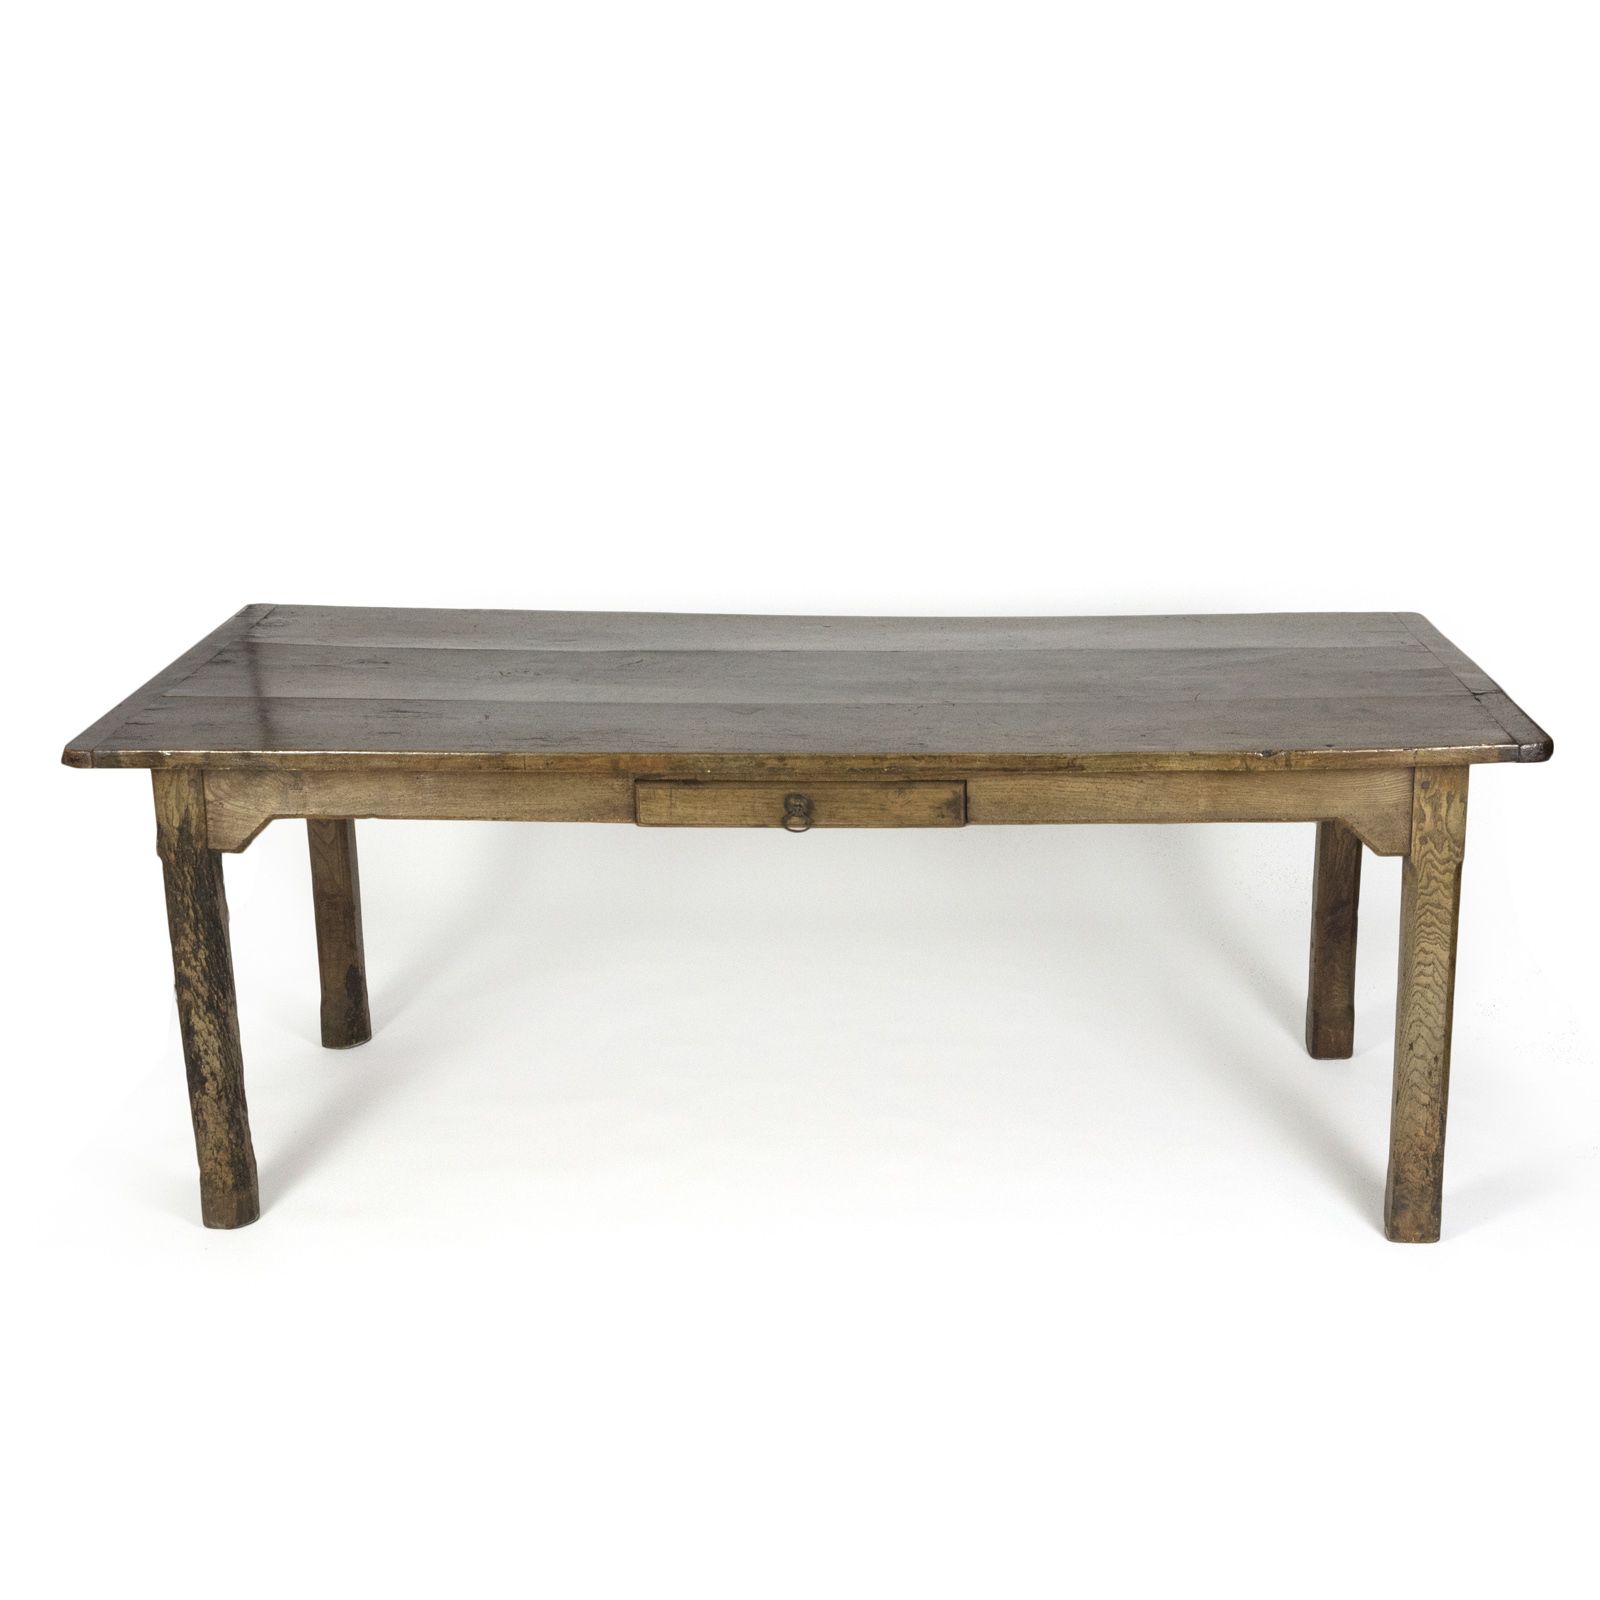 Fashionable Reclaimed Fruitwood Coffee Tables With Regard To Authentic English Country Farm Table, 19th Century (415) 355 1690 (Gallery 19 of 20)